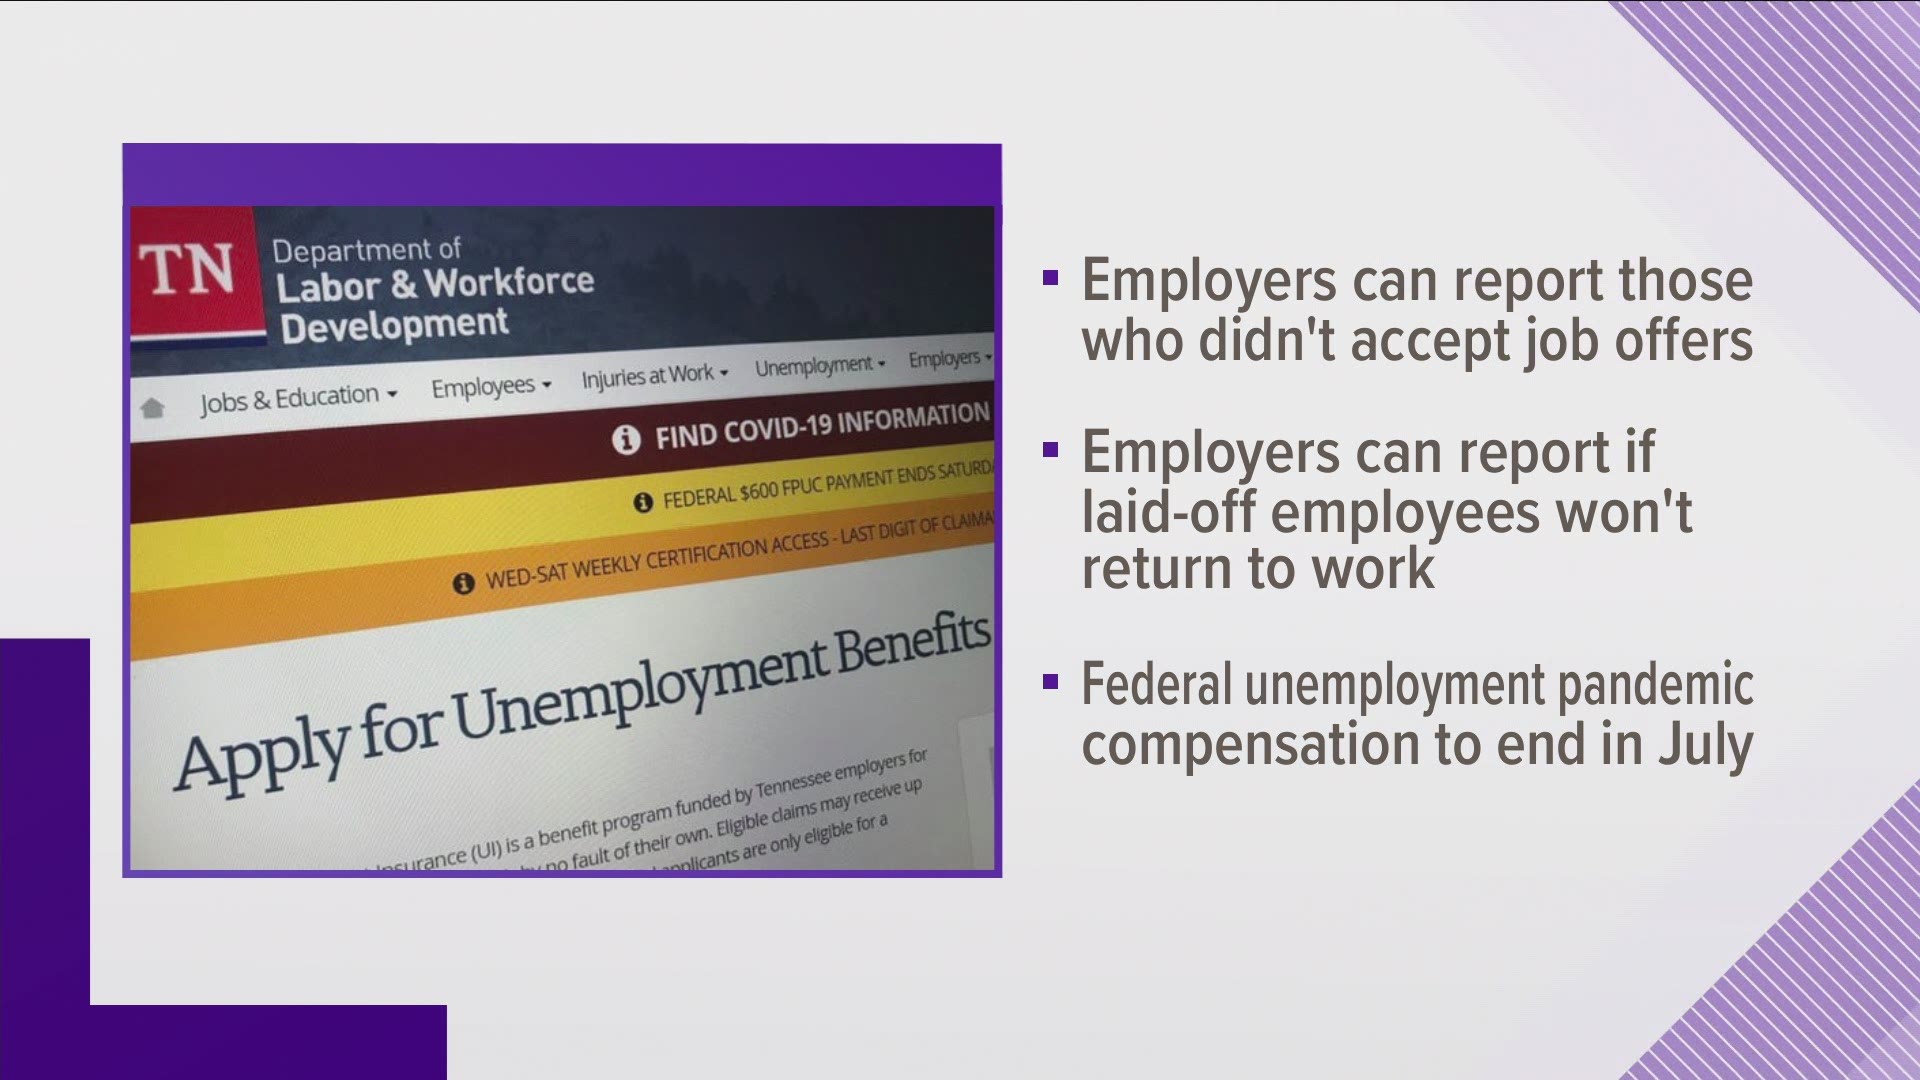 The Department of Labor says employers can report applicants who fail to accept a job offer.